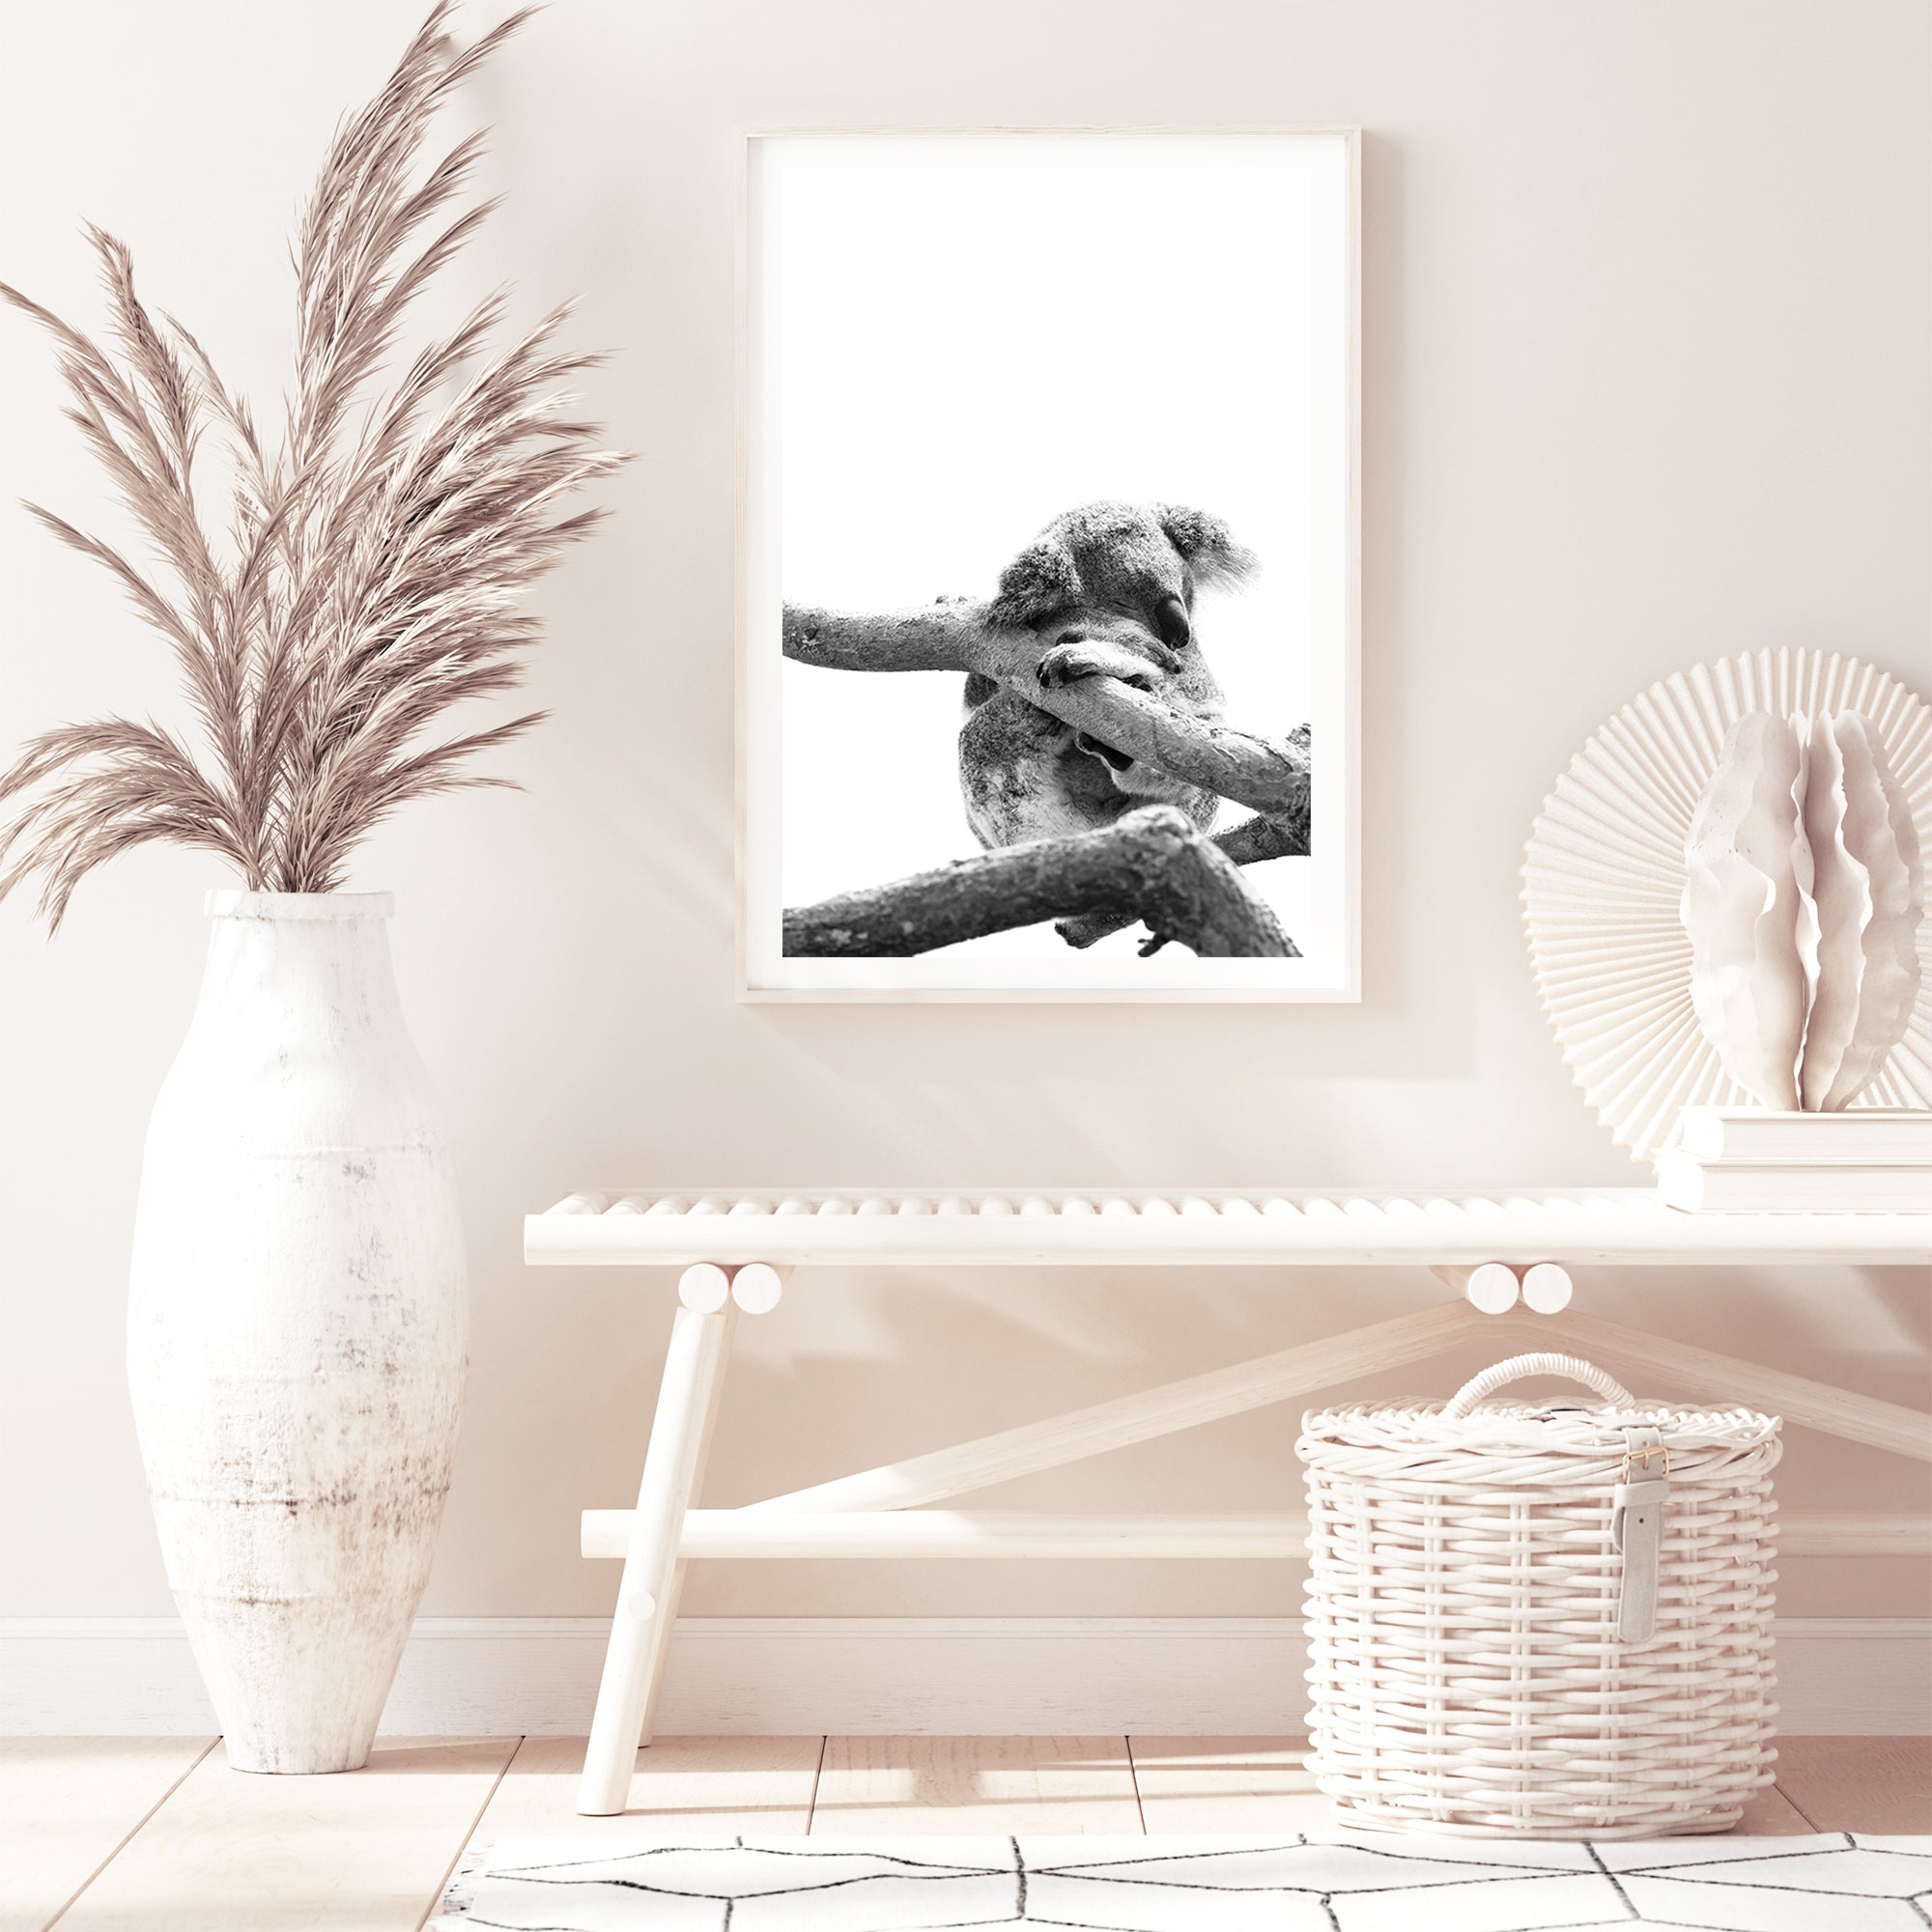 A gorgeous wall art print of a sleeping koala in a tree on a white background, available unframed or with a timber, black or white frame.